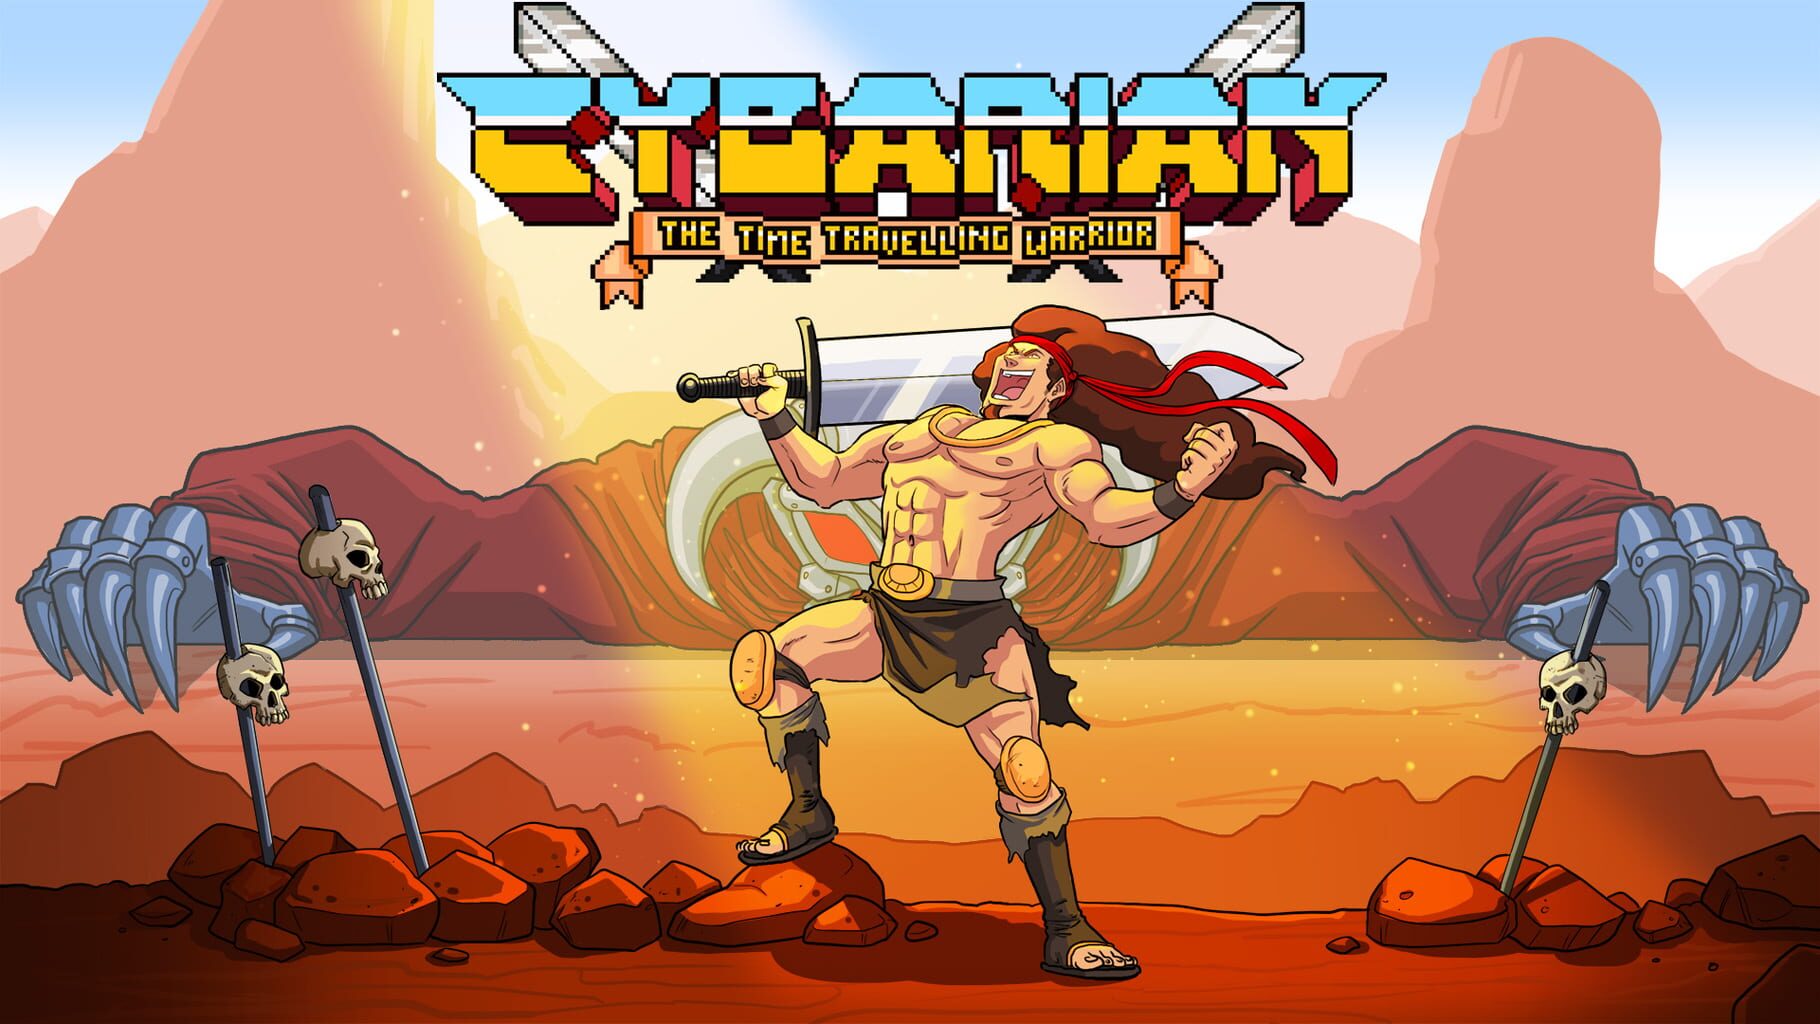 Cybarian: The Time Travelling Warrior artwork